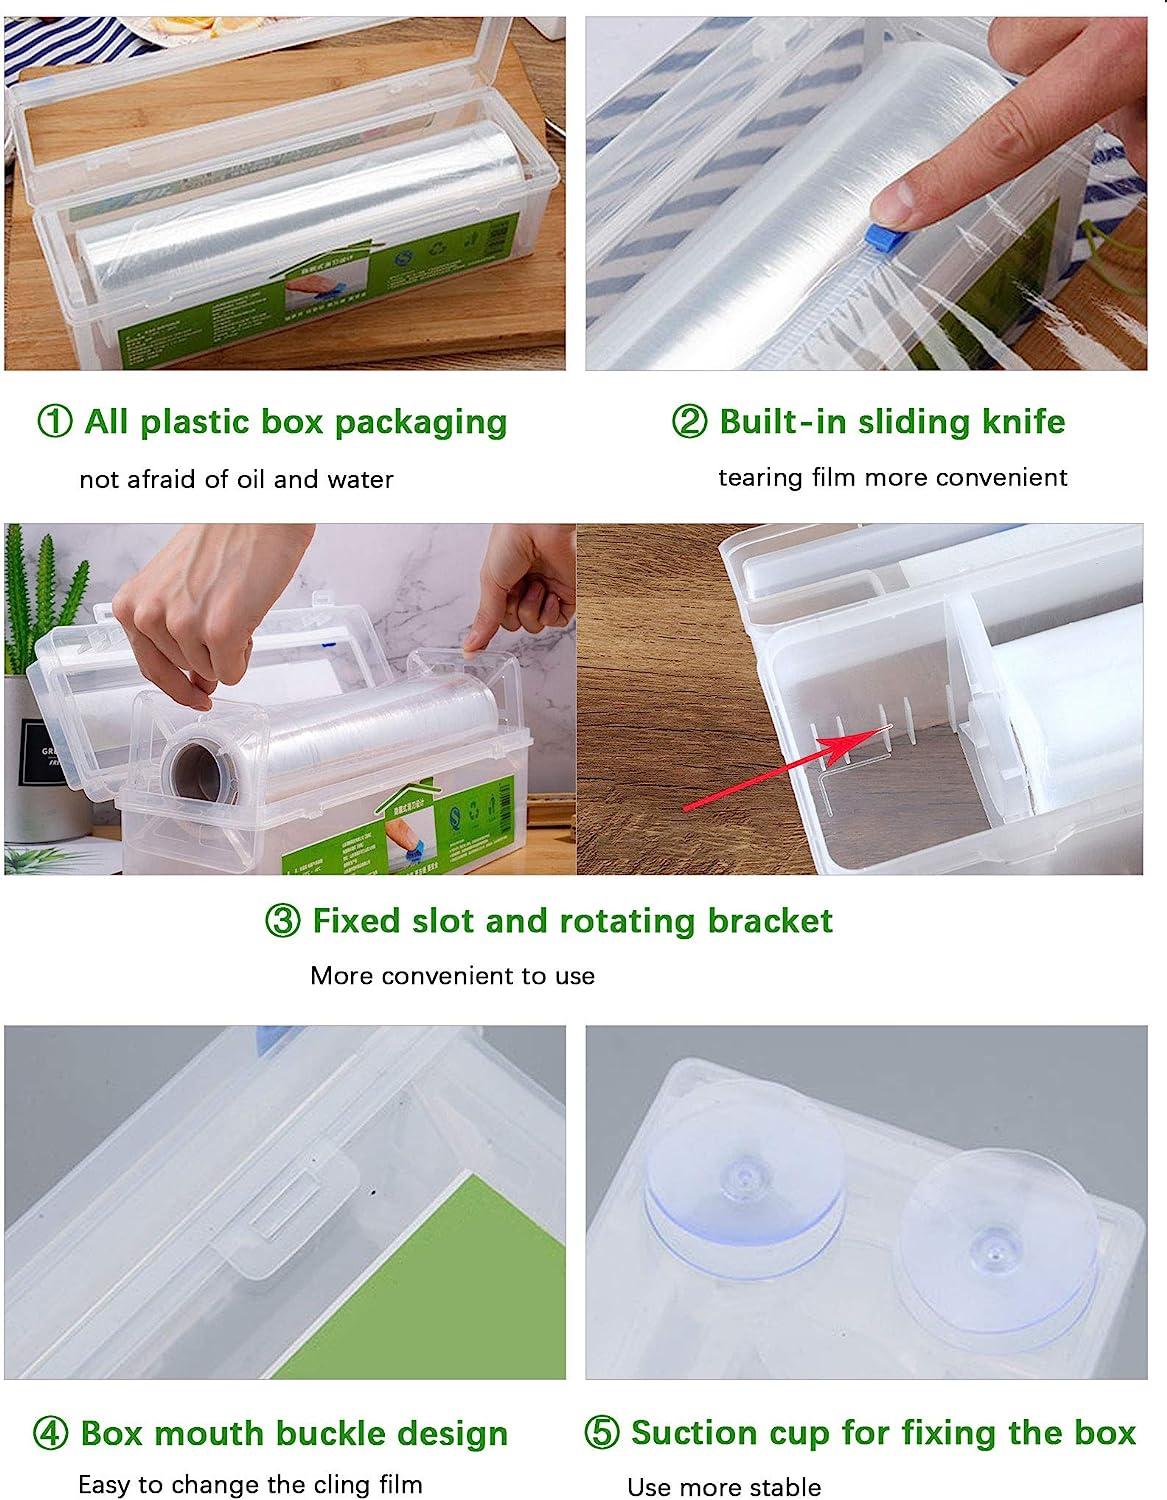 5 Clever Packing Tips using Plastic Wrap ⋆ Sprinkle Some Fun